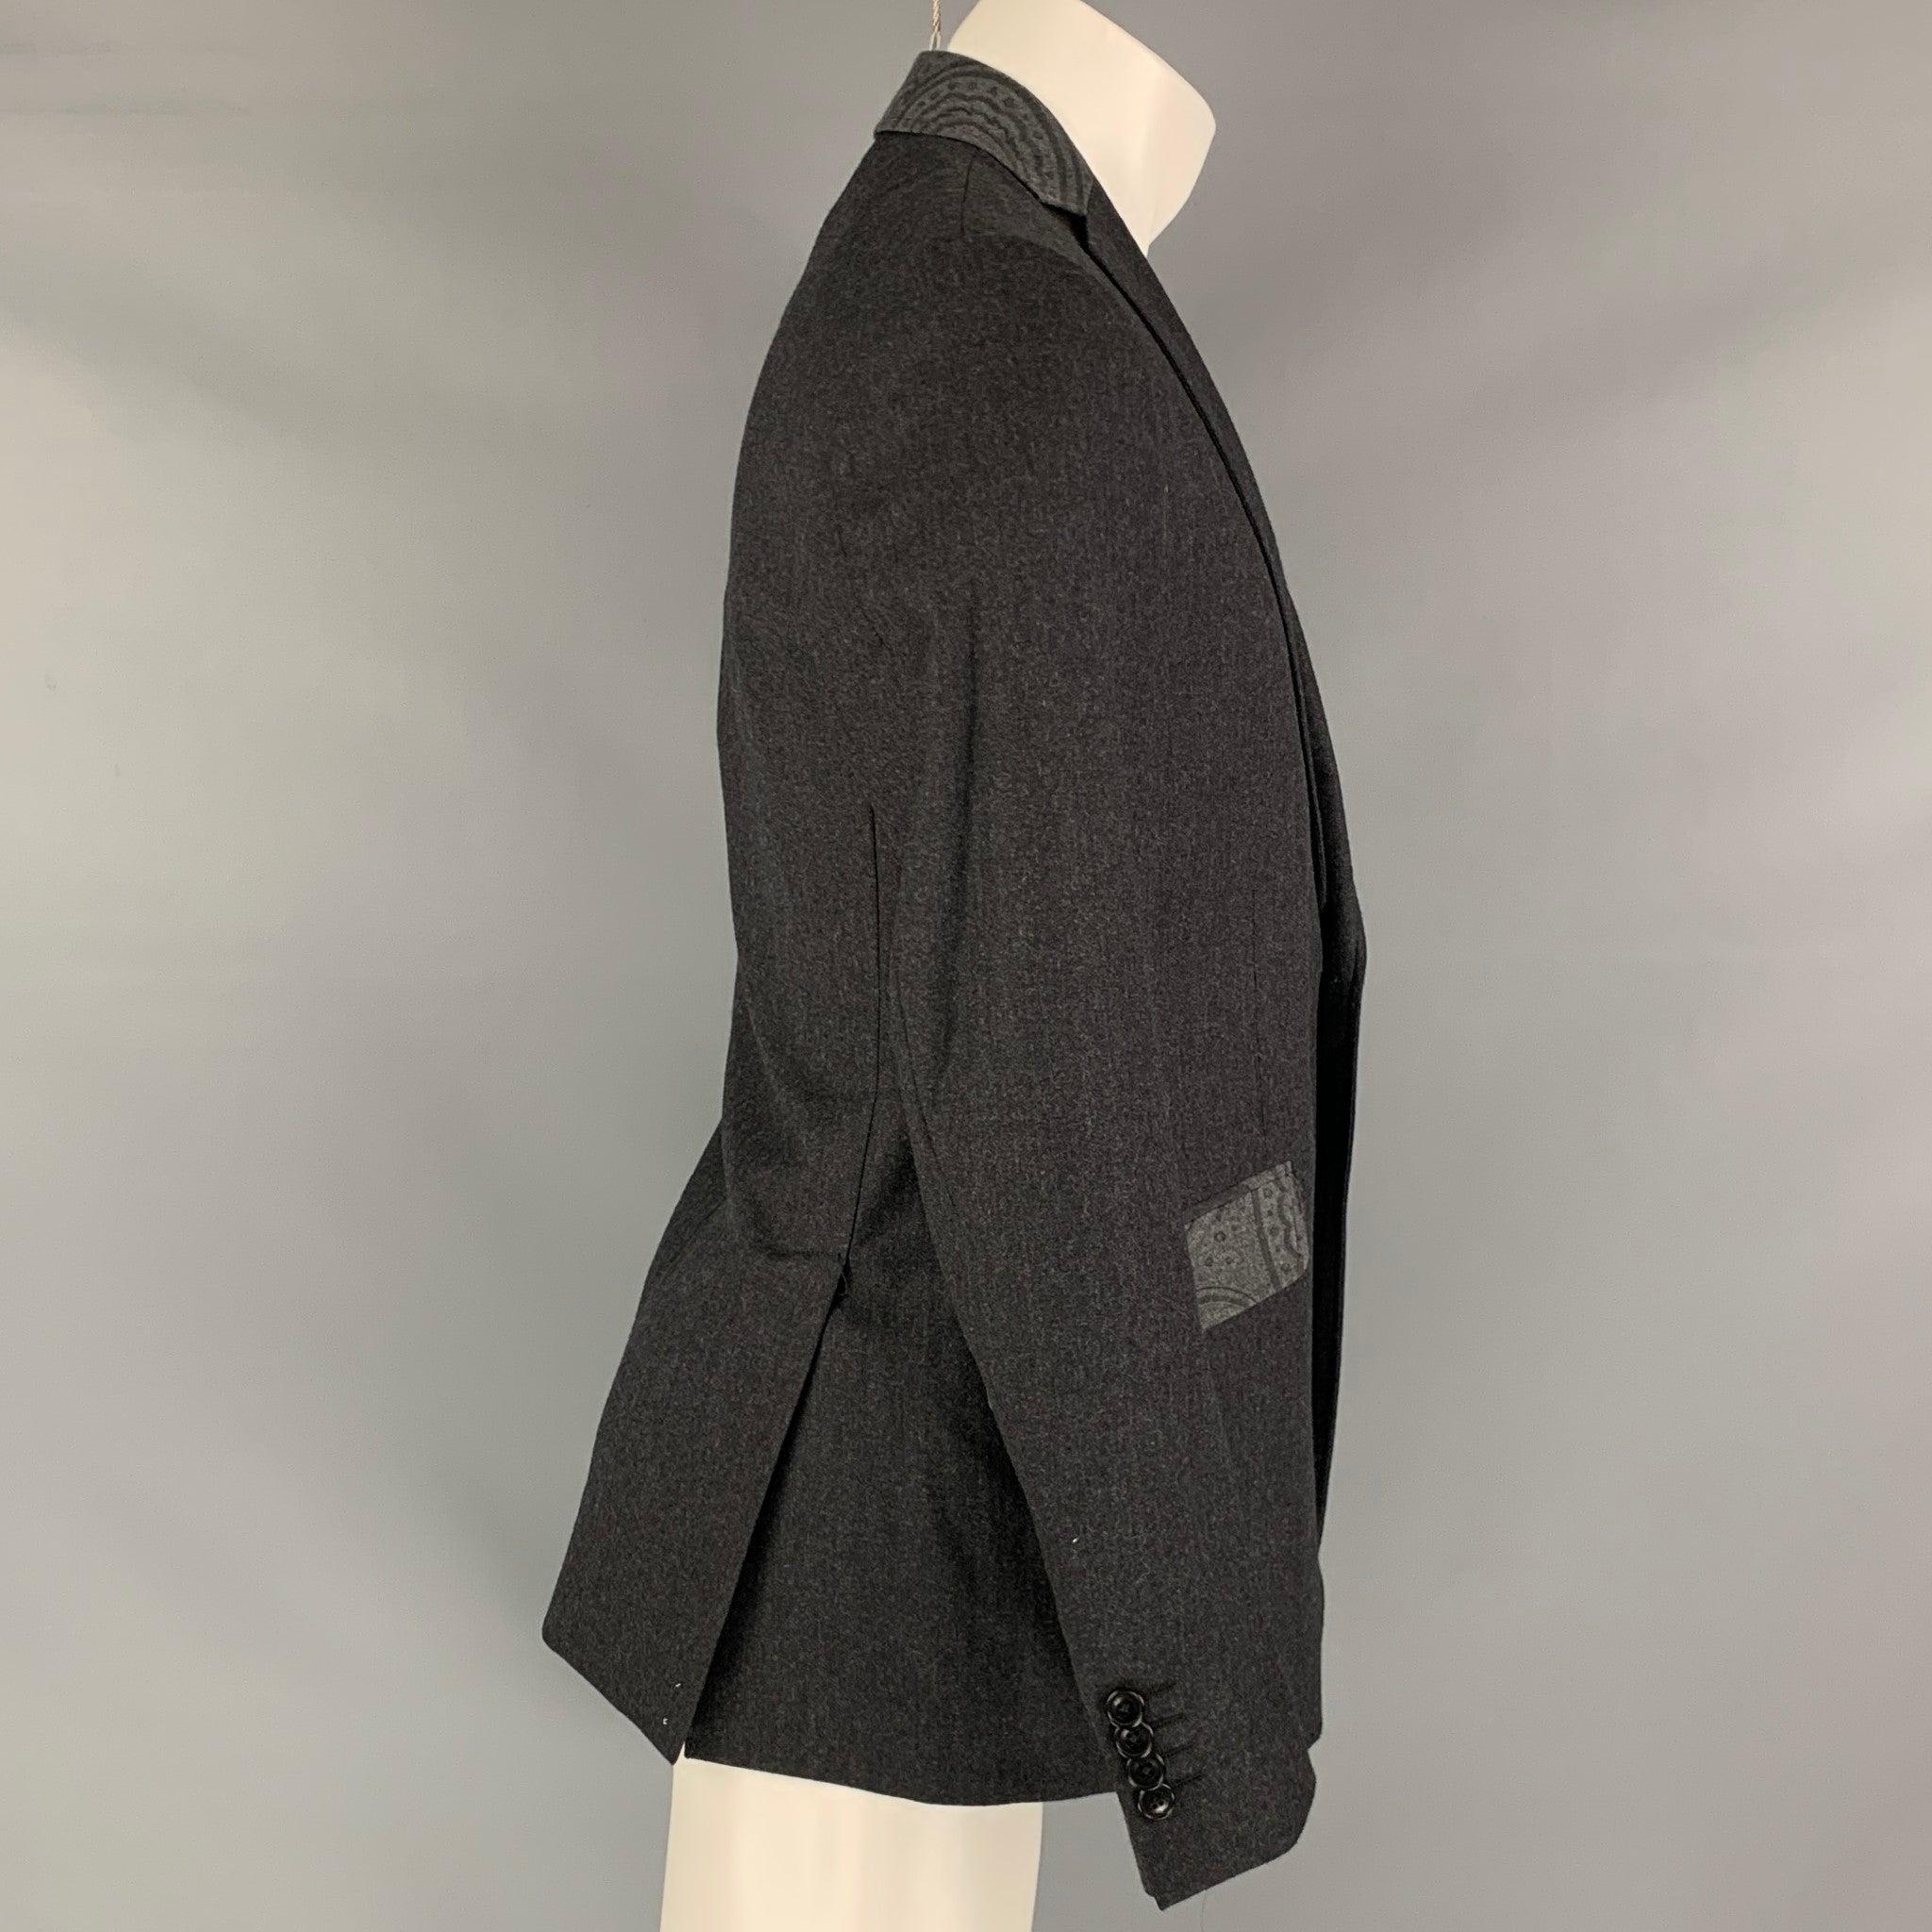 ETRO sport coat comes in a charcoal wool blend woven material with a full liner featuring a notch lapel, flap pockets, double back vent, and a two button closure. Made in Italy.Excellent Pre-Owned Condition. 

Marked:   38 

Measurements: 
